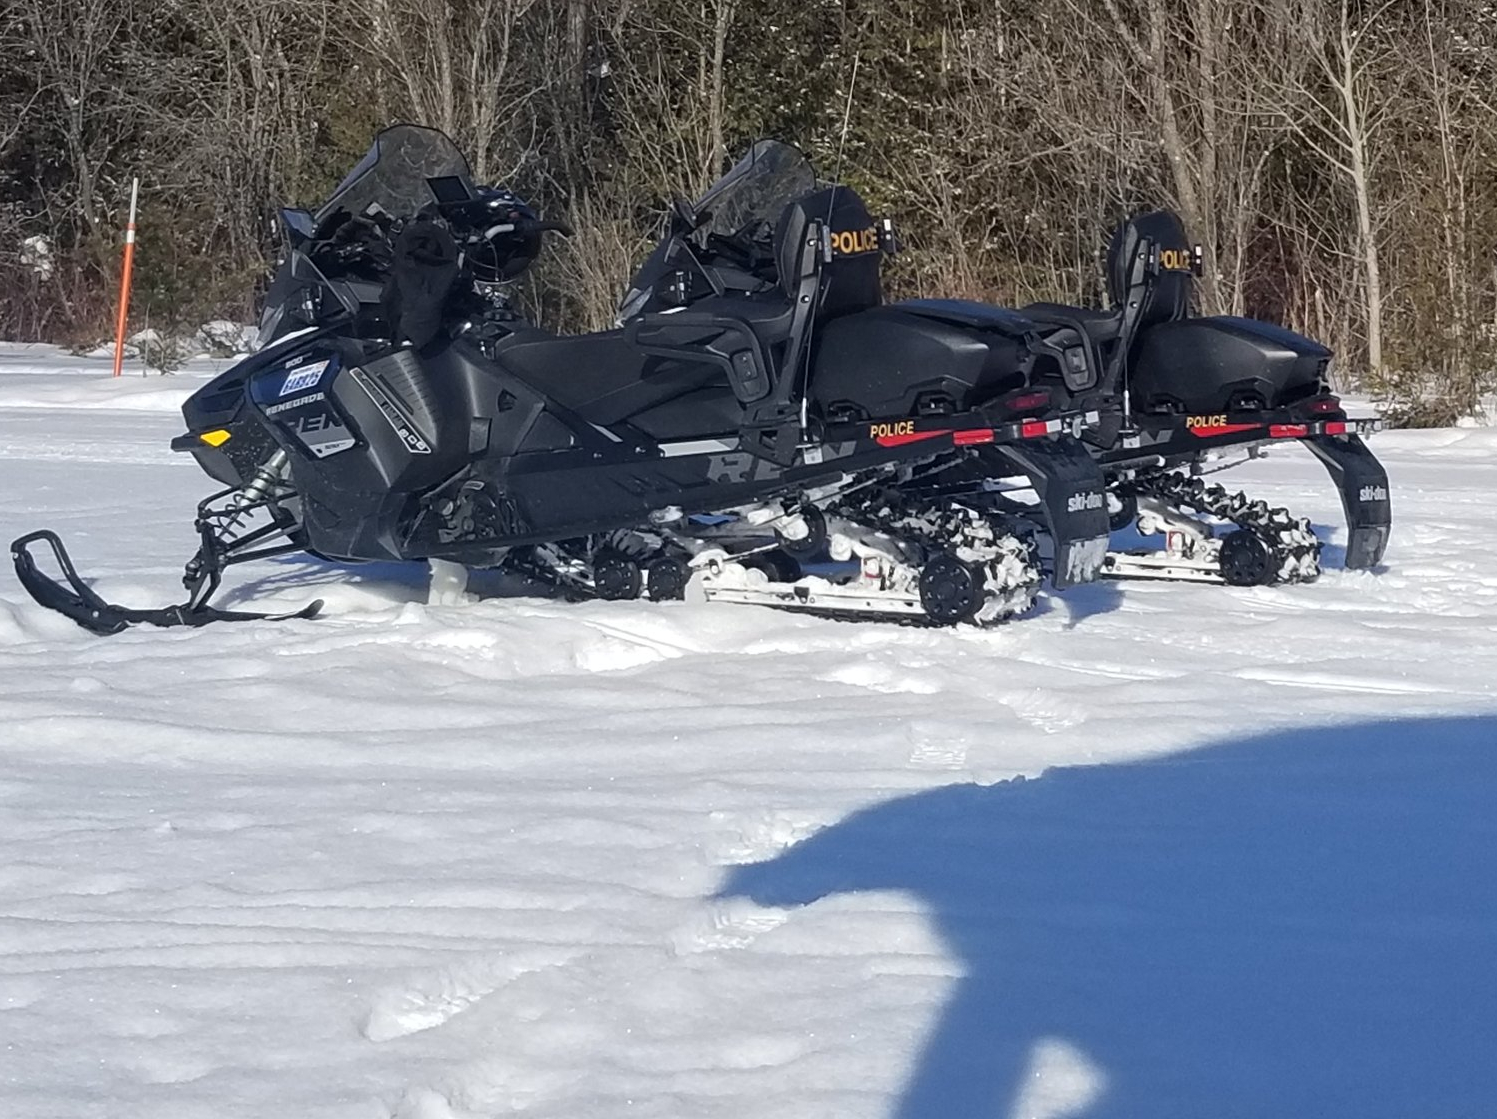 OPP promotes snowmobile safety